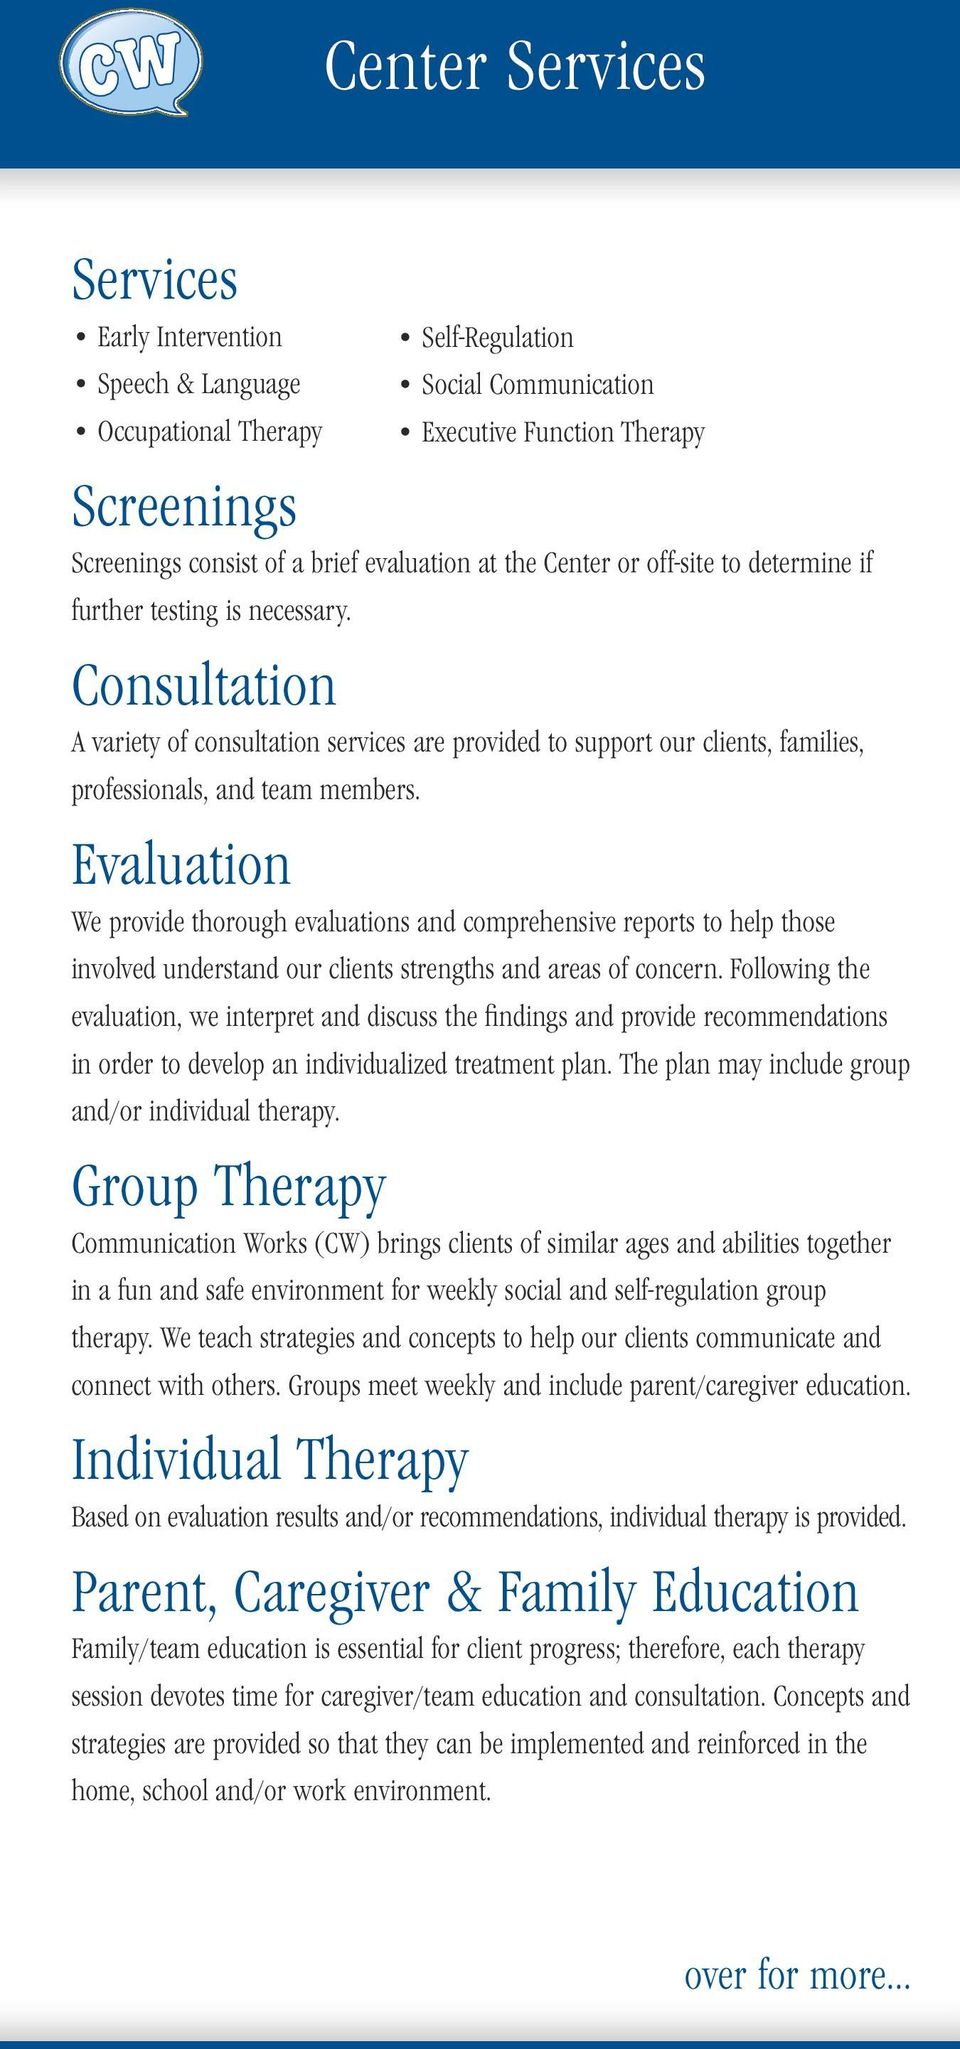 Evaluation We provide thorough evaluations and comprehensive reports to help those involved understand our clients strengths and areas of concern.